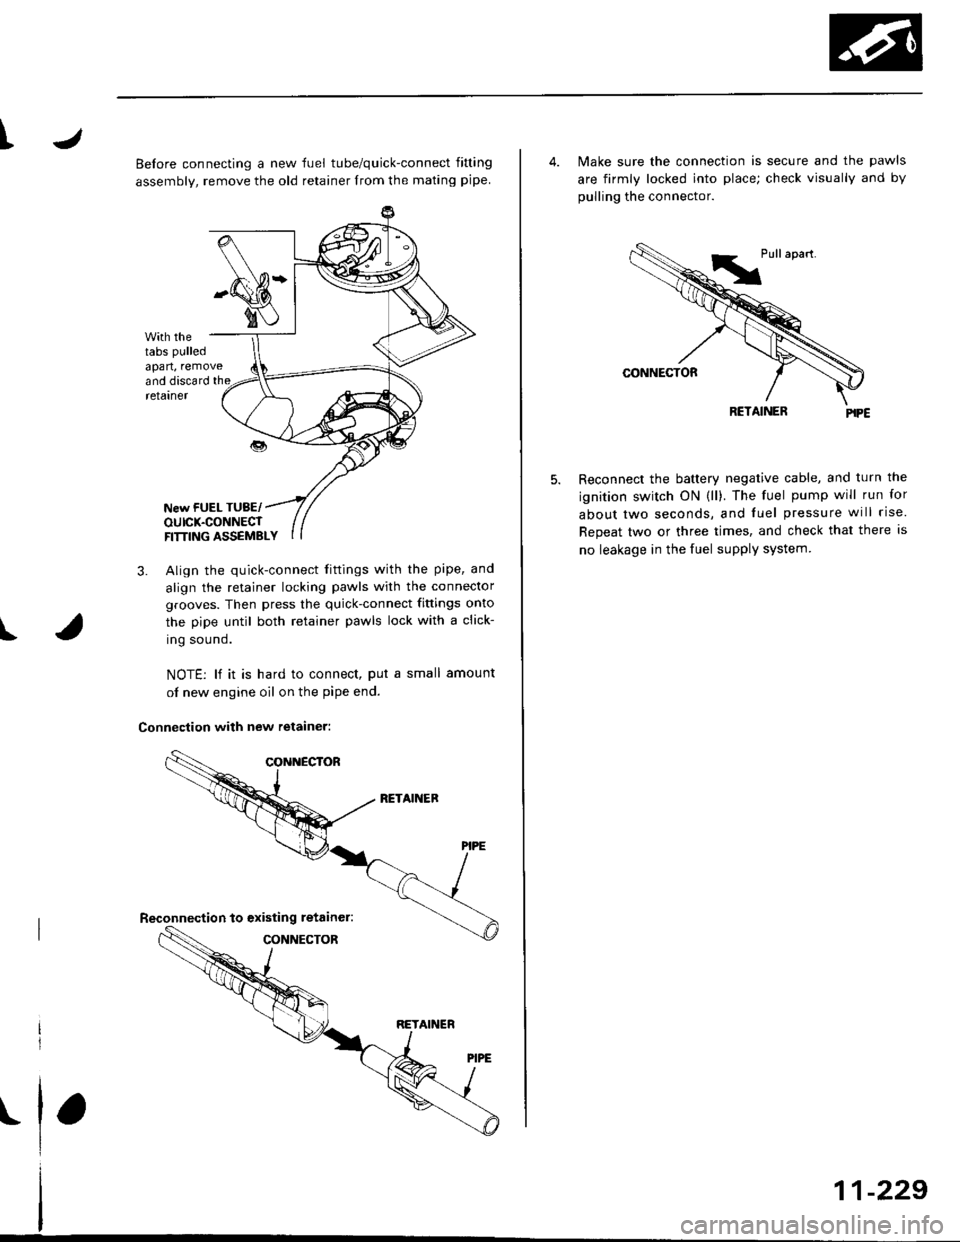 HONDA CIVIC 1996 6.G Service Manual t
Belore connecting a new fuel tube/quick-connect fining
assembly, remove the old retainer from the mating pipe
with thetabs pulled
apan, removeand discard the
I
retarner
New FUEL TUBE/OUICK.CONNECTFI